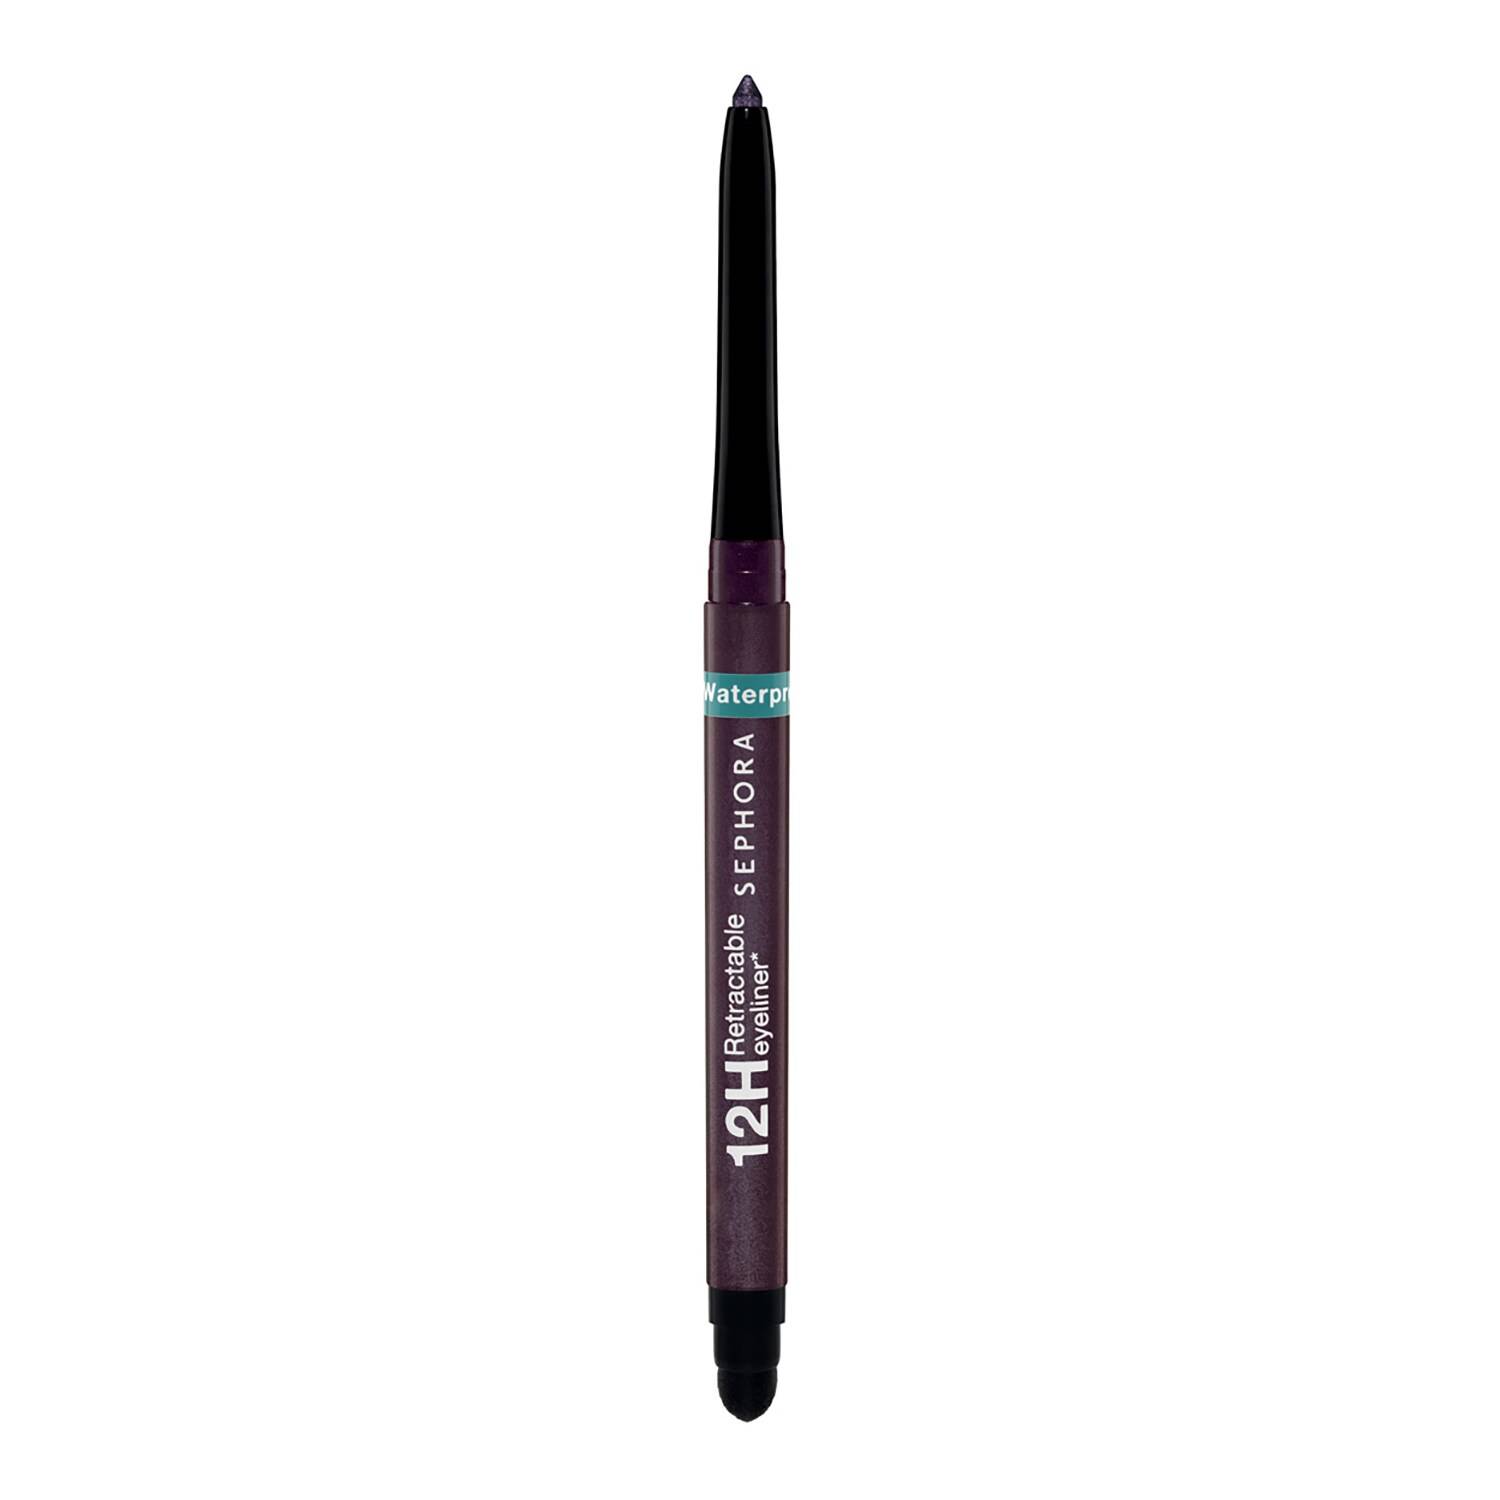 Sephora Collection Waterproof 12H Retractable Eyeliner Pencil 0.3G 21 Shimmer Plum